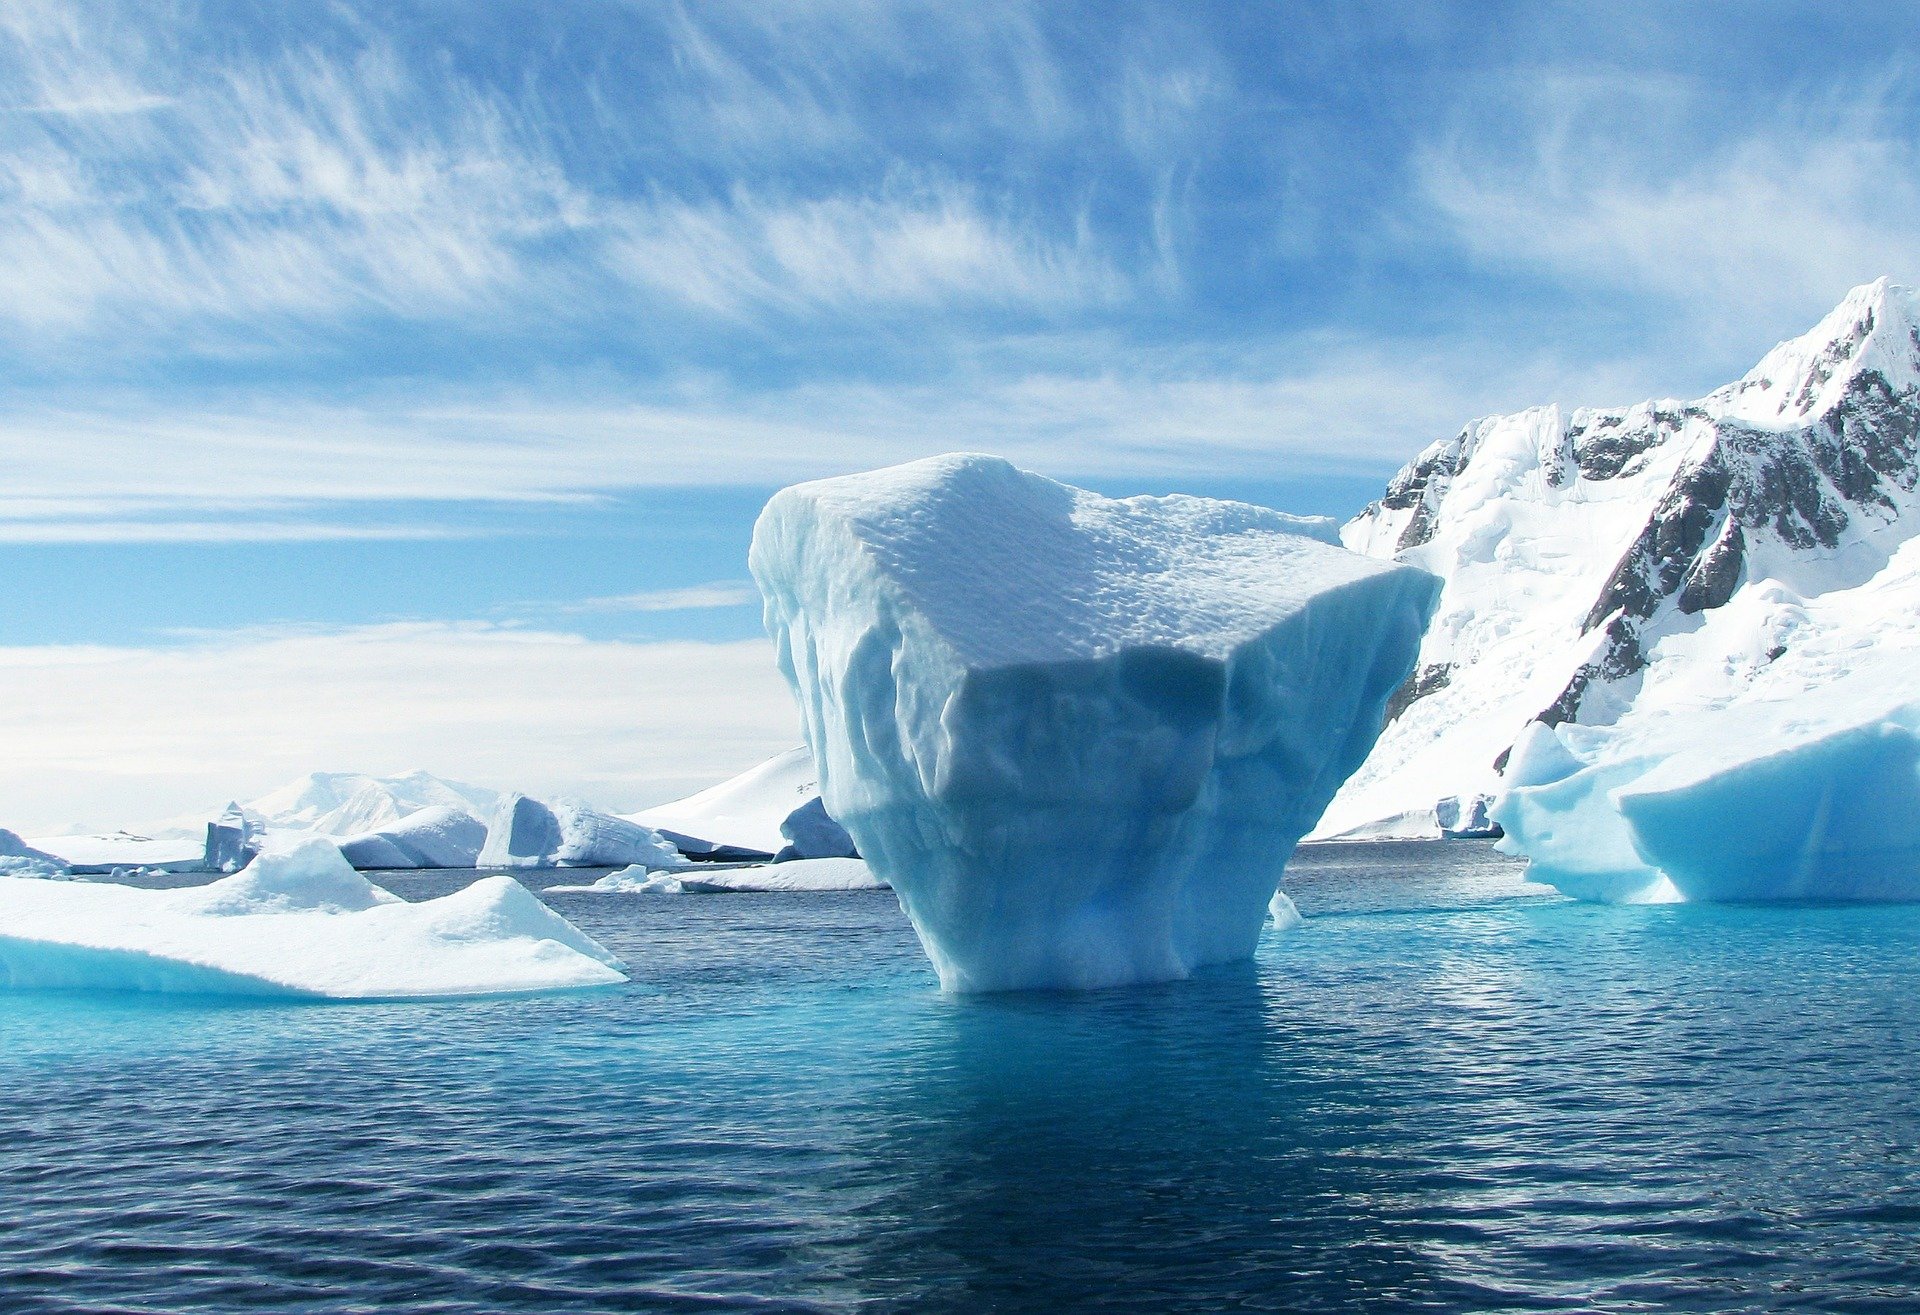 #Diminishing Arctic sea ice has lasting impacts on global climate